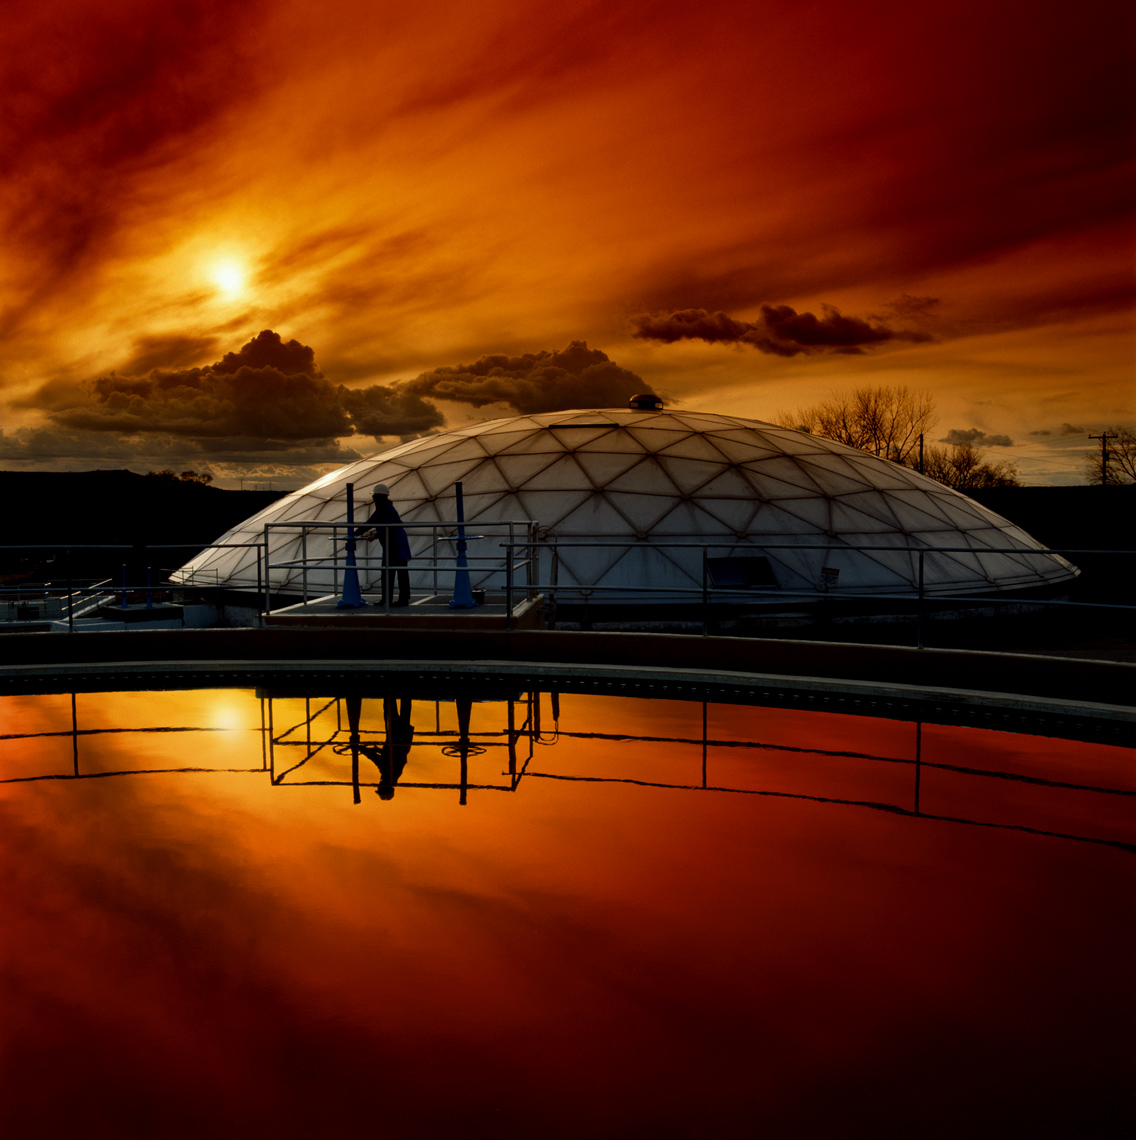 water-treatment-dome-sunset.jpg